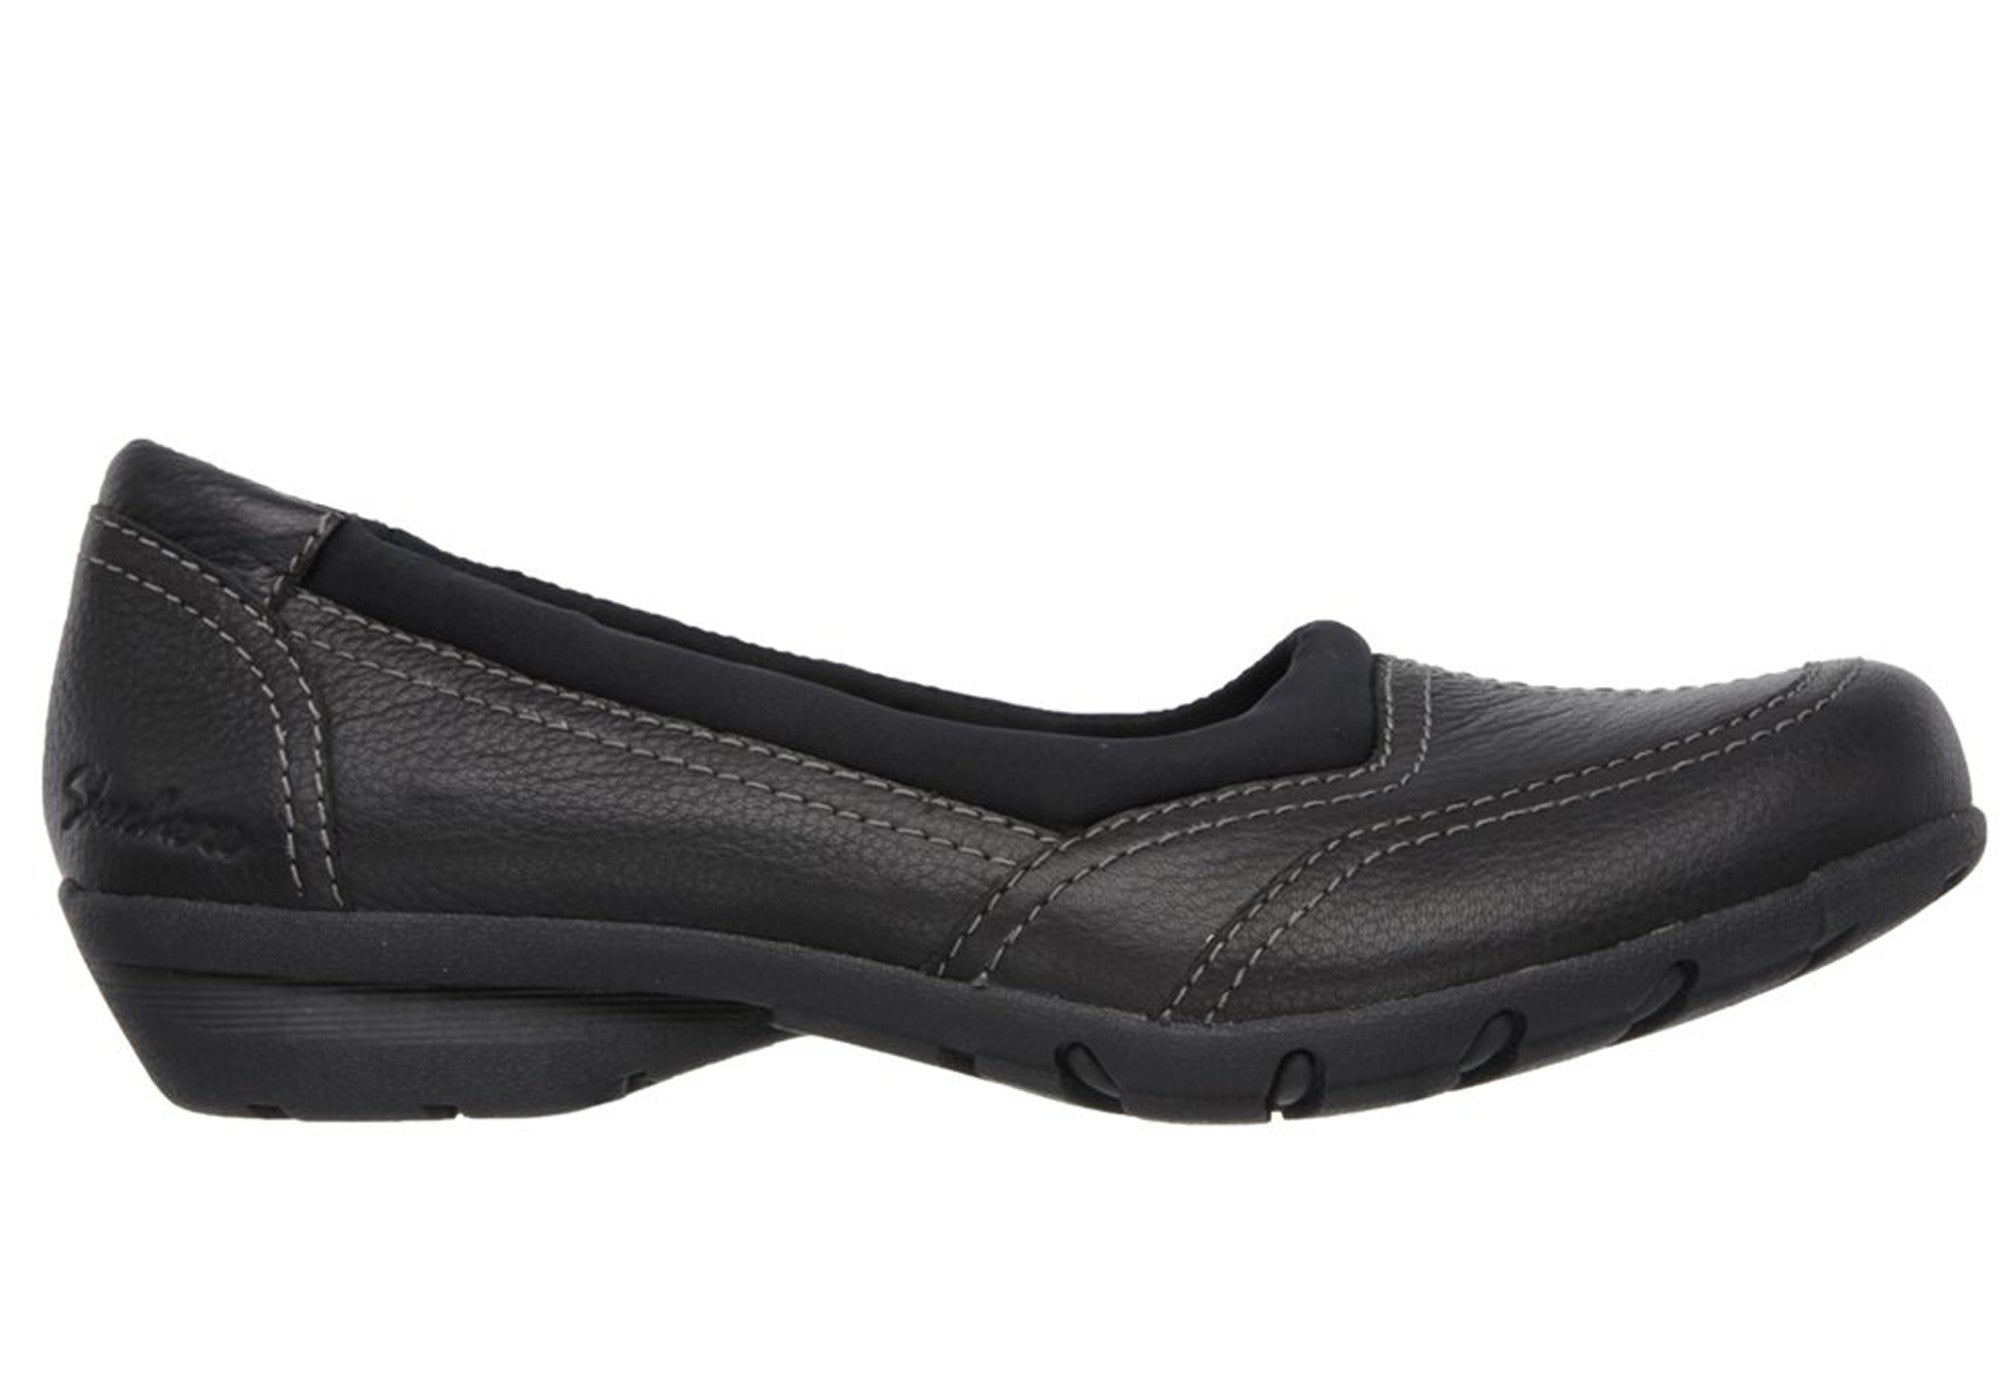 skechers womens black leather shoes